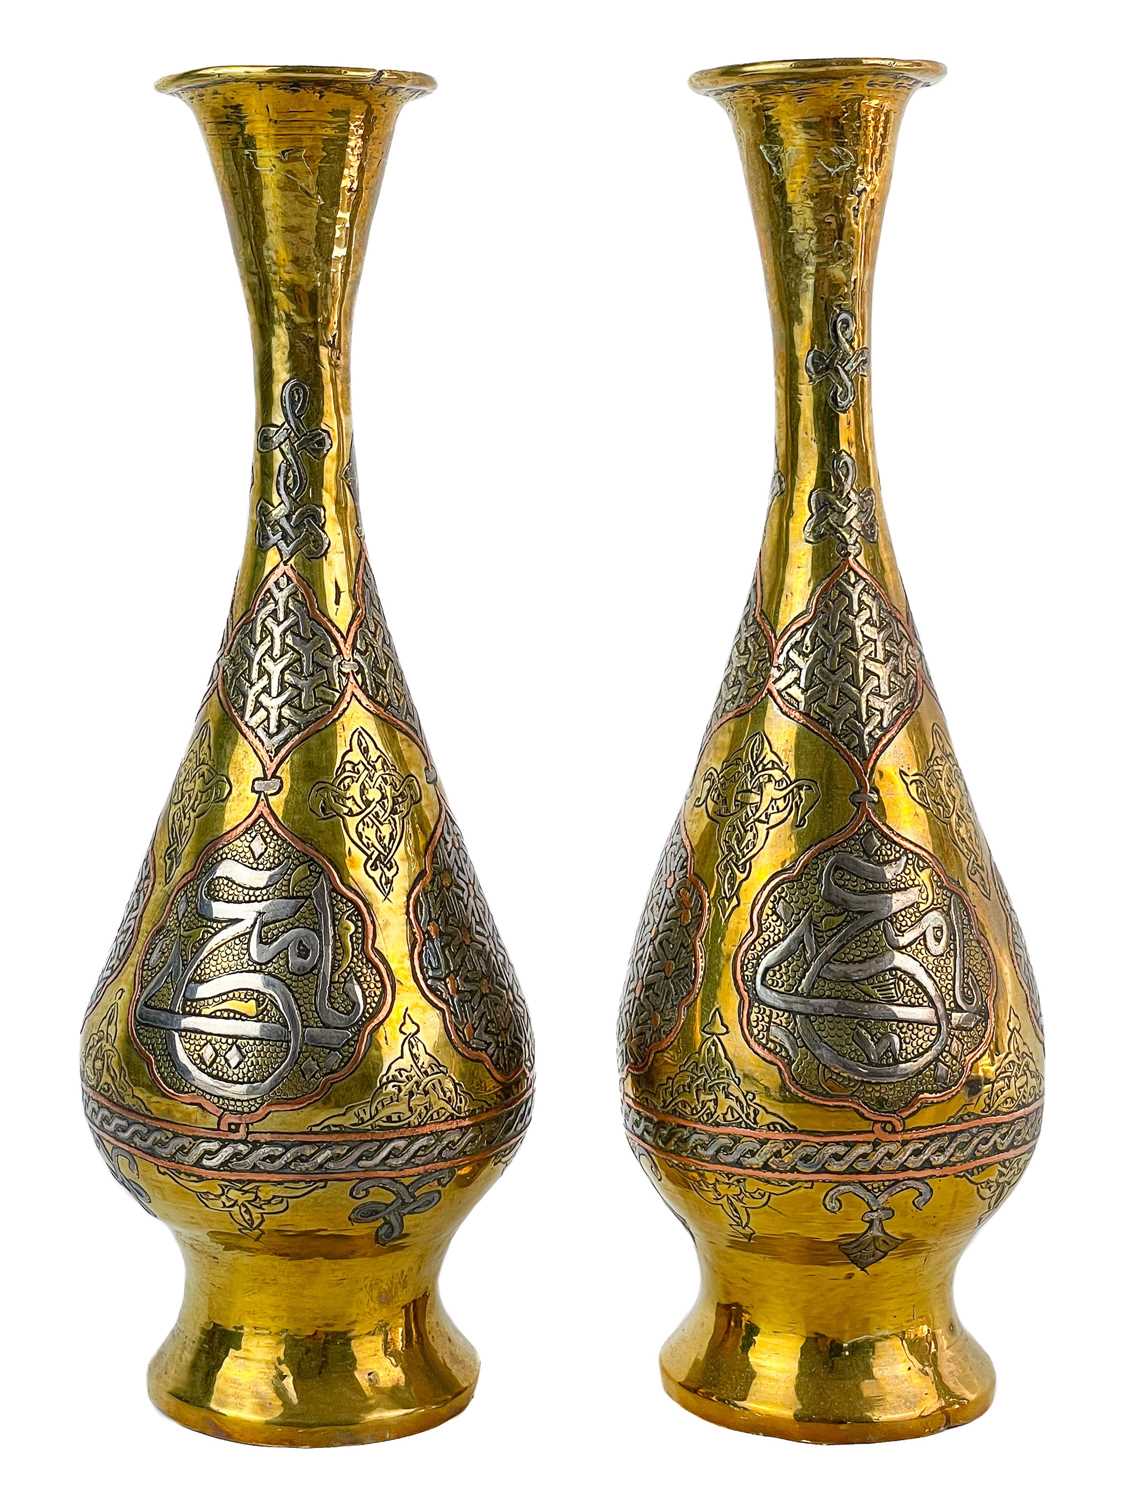 Lot 14 - A pair of Cairoware brass and silver inlaid vases, Egypt, 19th century.